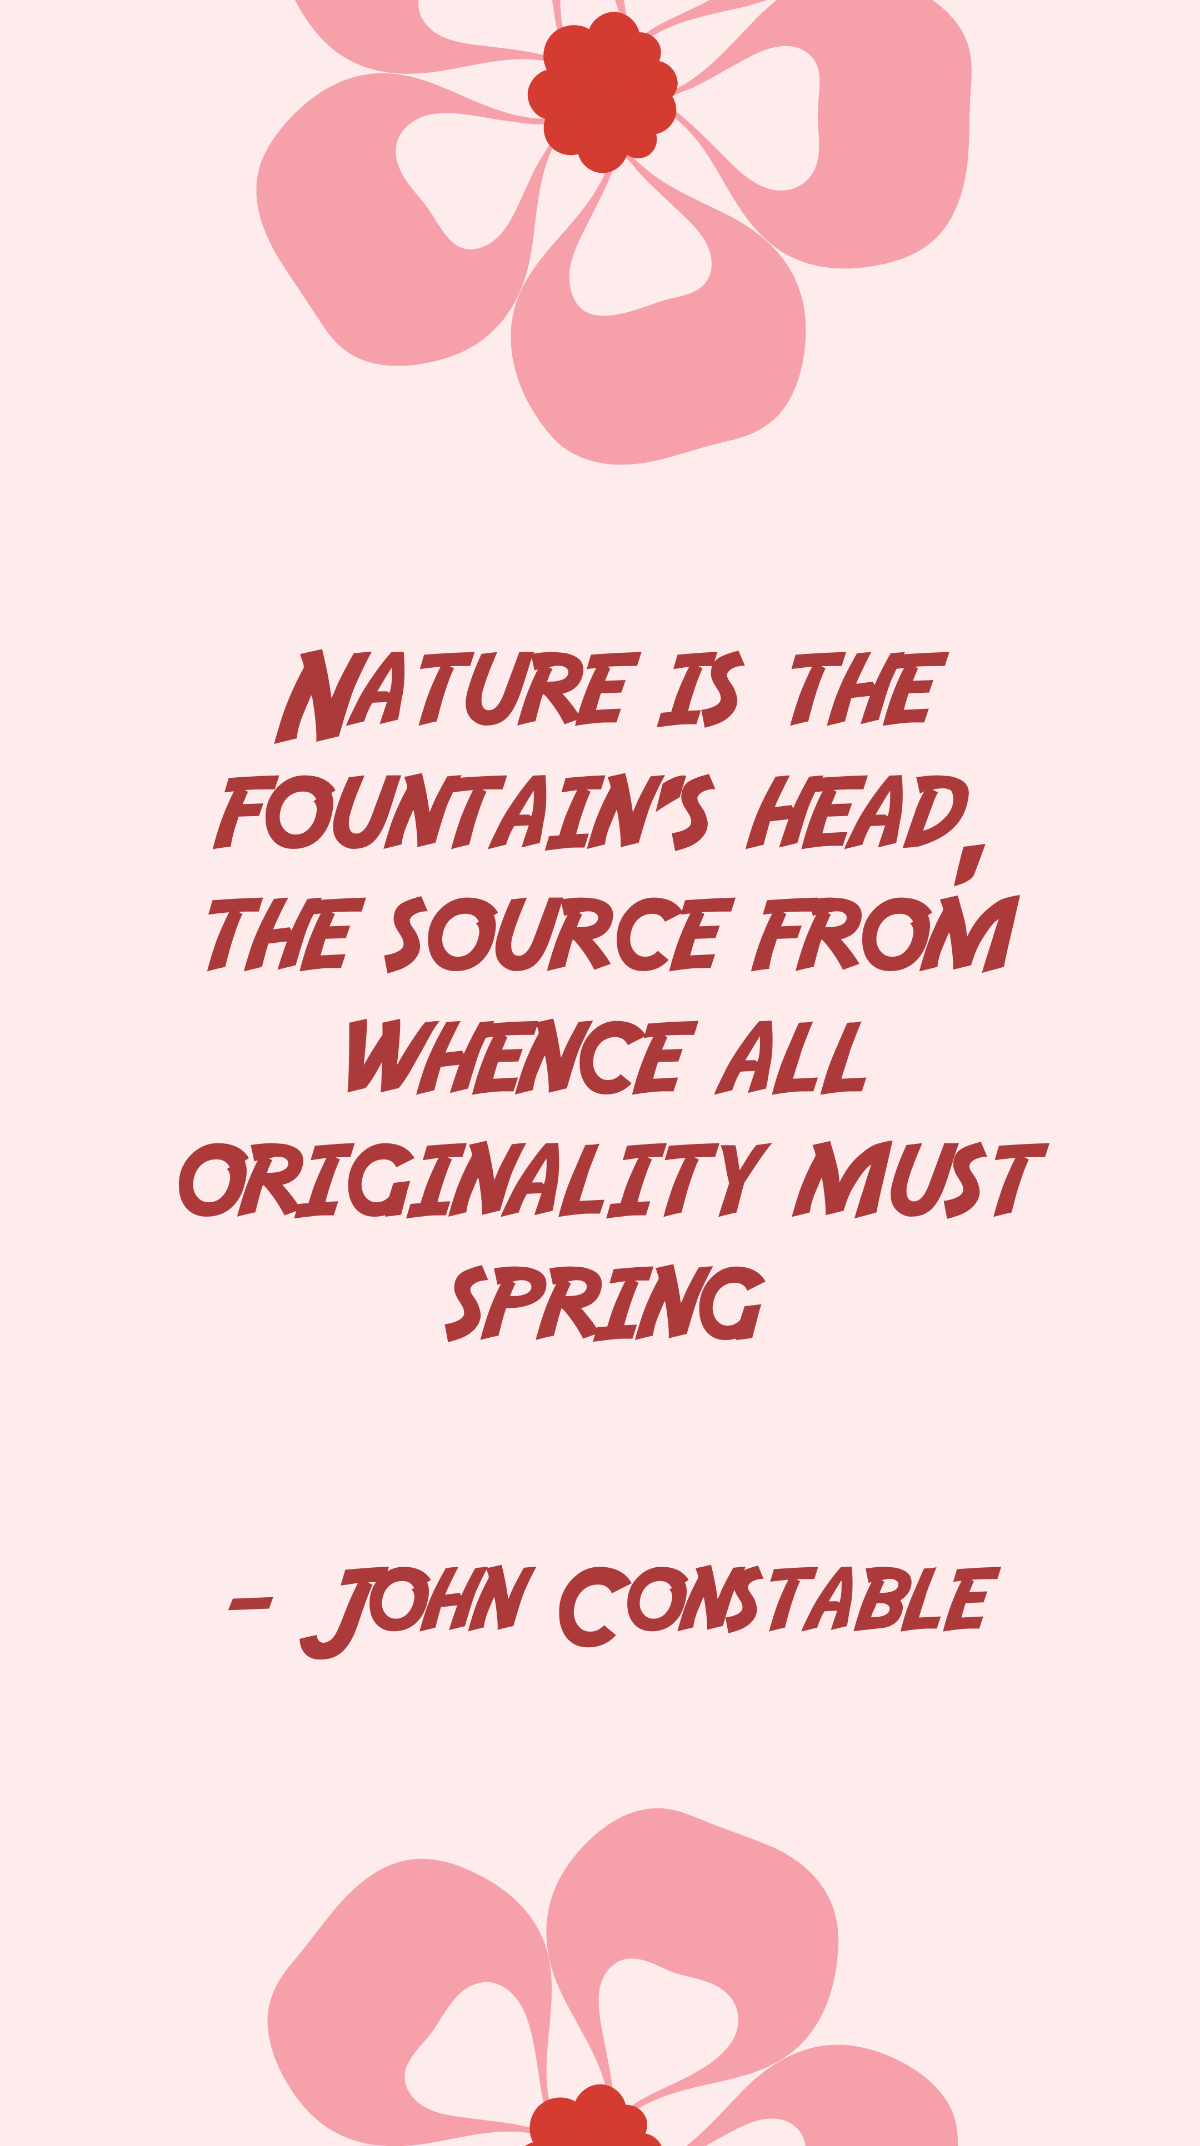 John Constable - Nature is the fountain's head, the source from whence all originality must spring